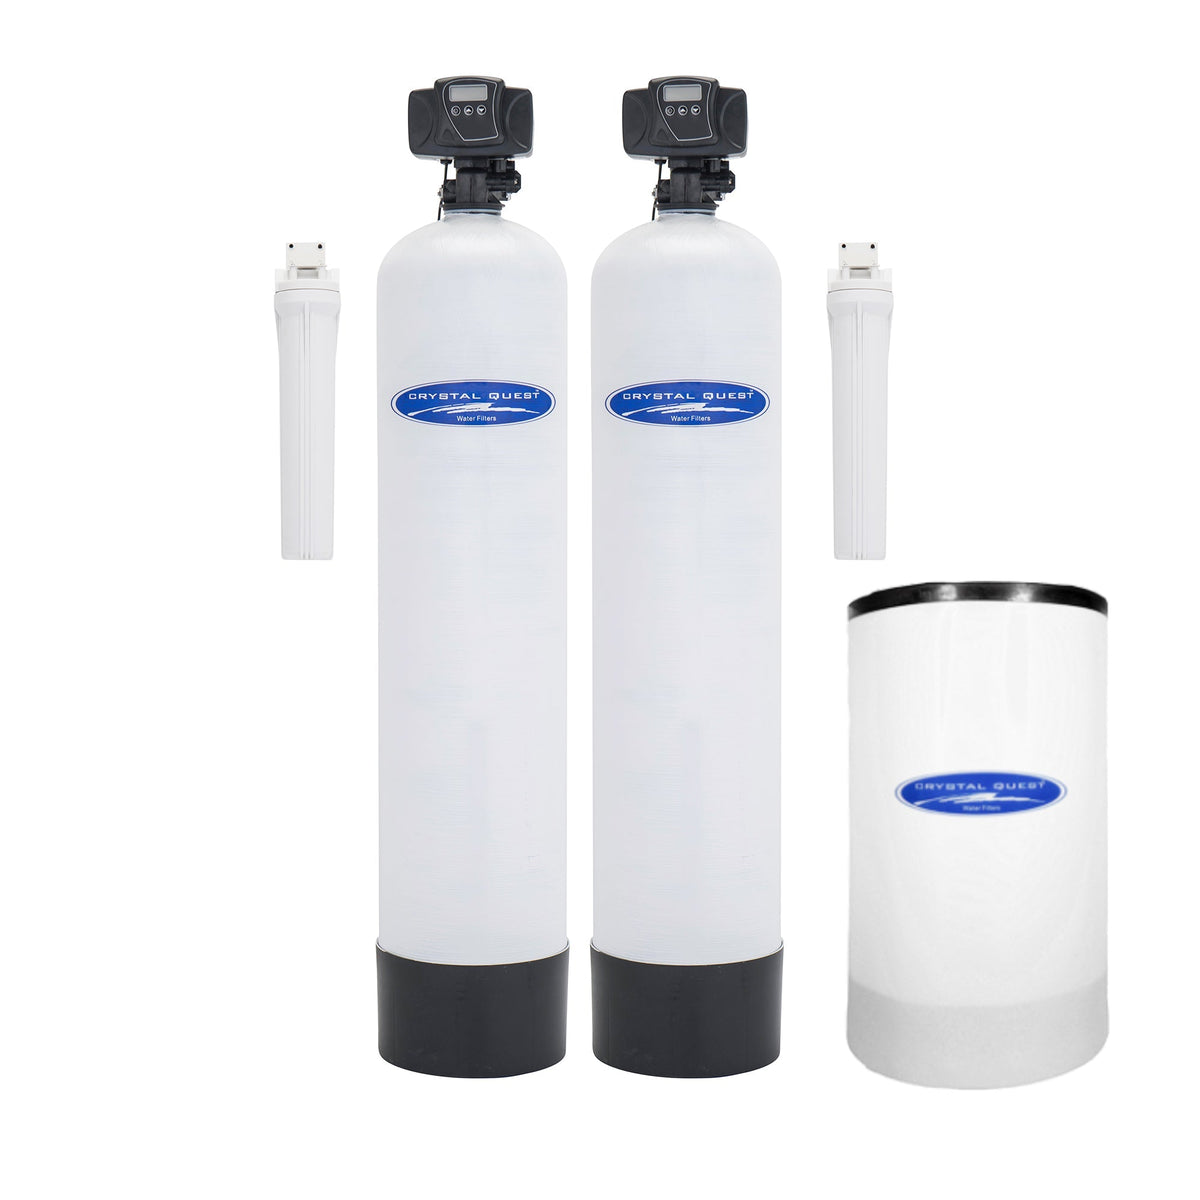 16-18 GPM / Fiberglass Lead Removal Whole House Water Filter - Whole House Water Filters - Crystal Quest